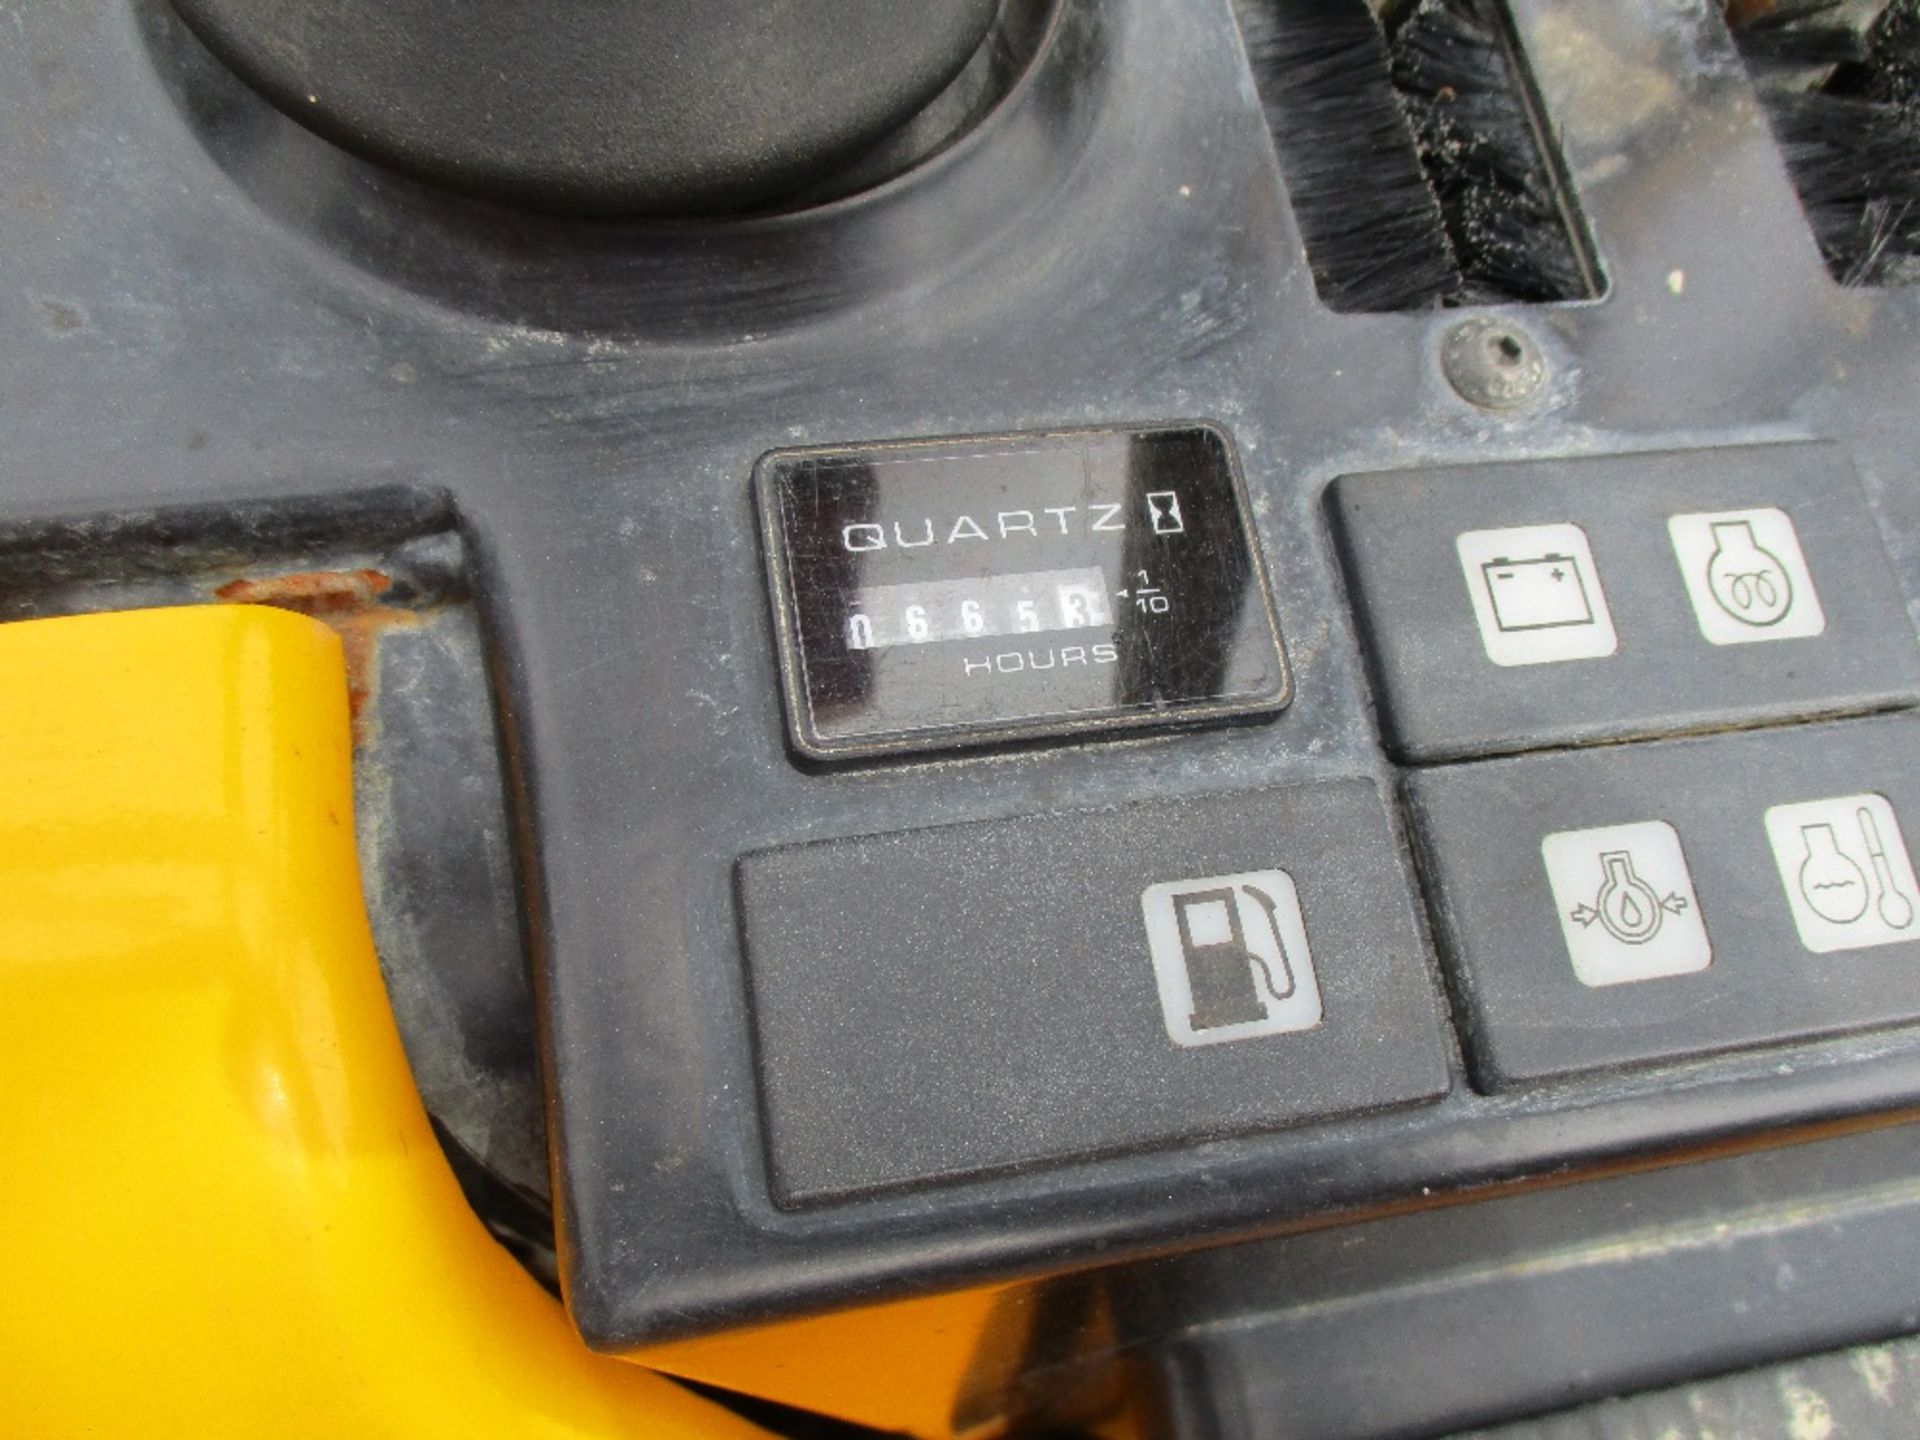 JCB 8008 CTS MICRO EXCAVATOR EXPANDING TRACKS 664REC HRS - Image 5 of 6